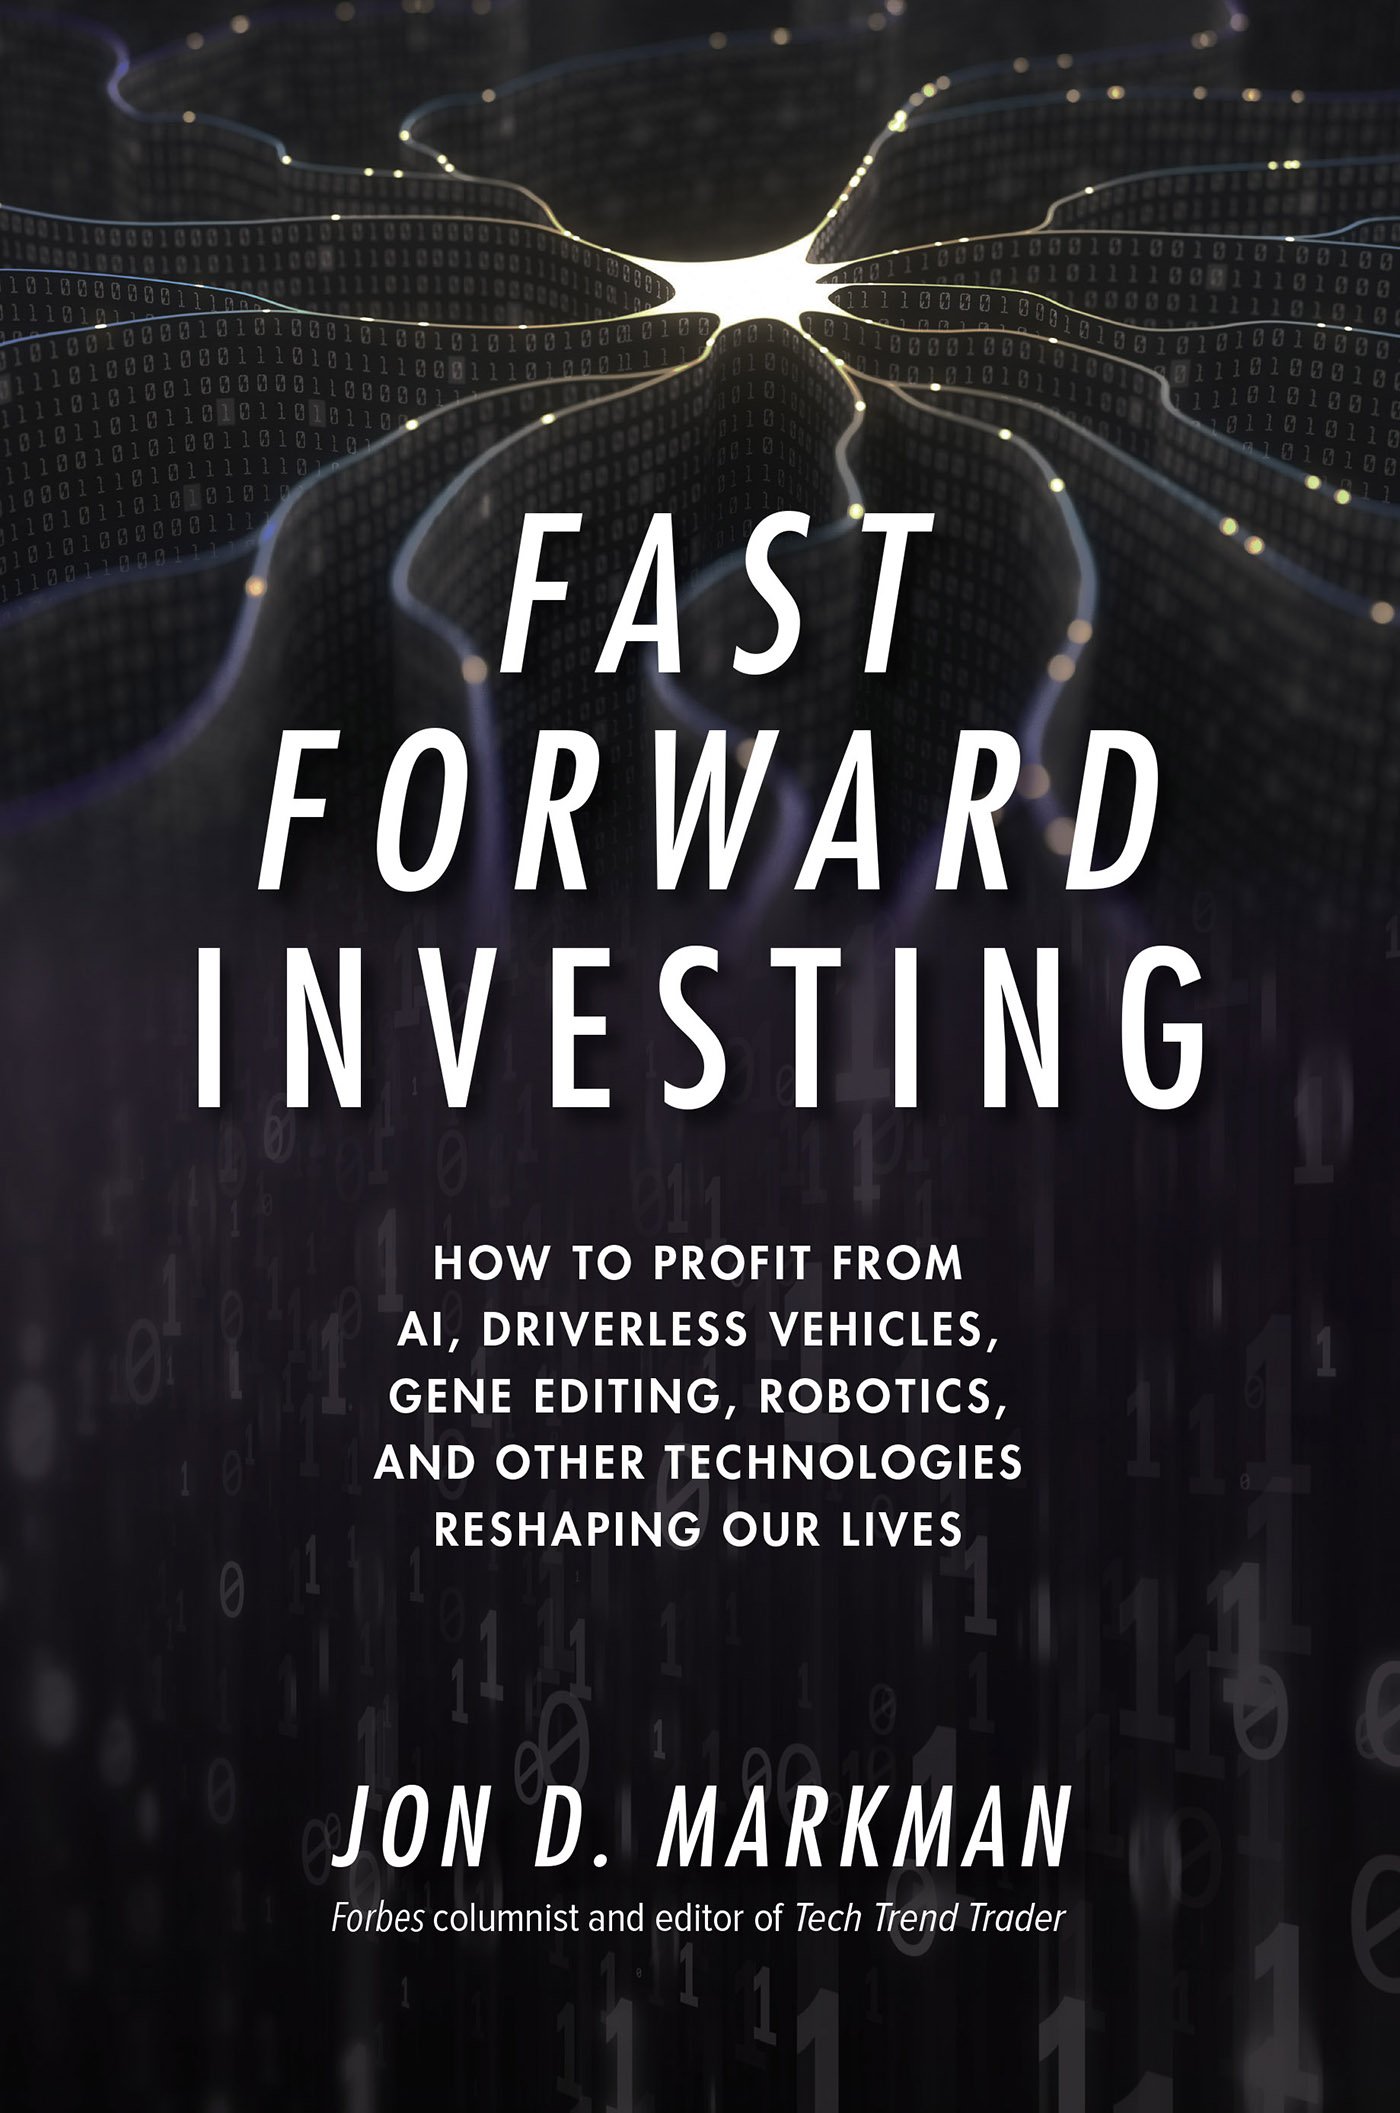 Fast Forward Investing How to Profit from AI Driverless Vehicles Gene
Editing Robotics and Other Technologies Reshaping Our Lives Epub-Ebook